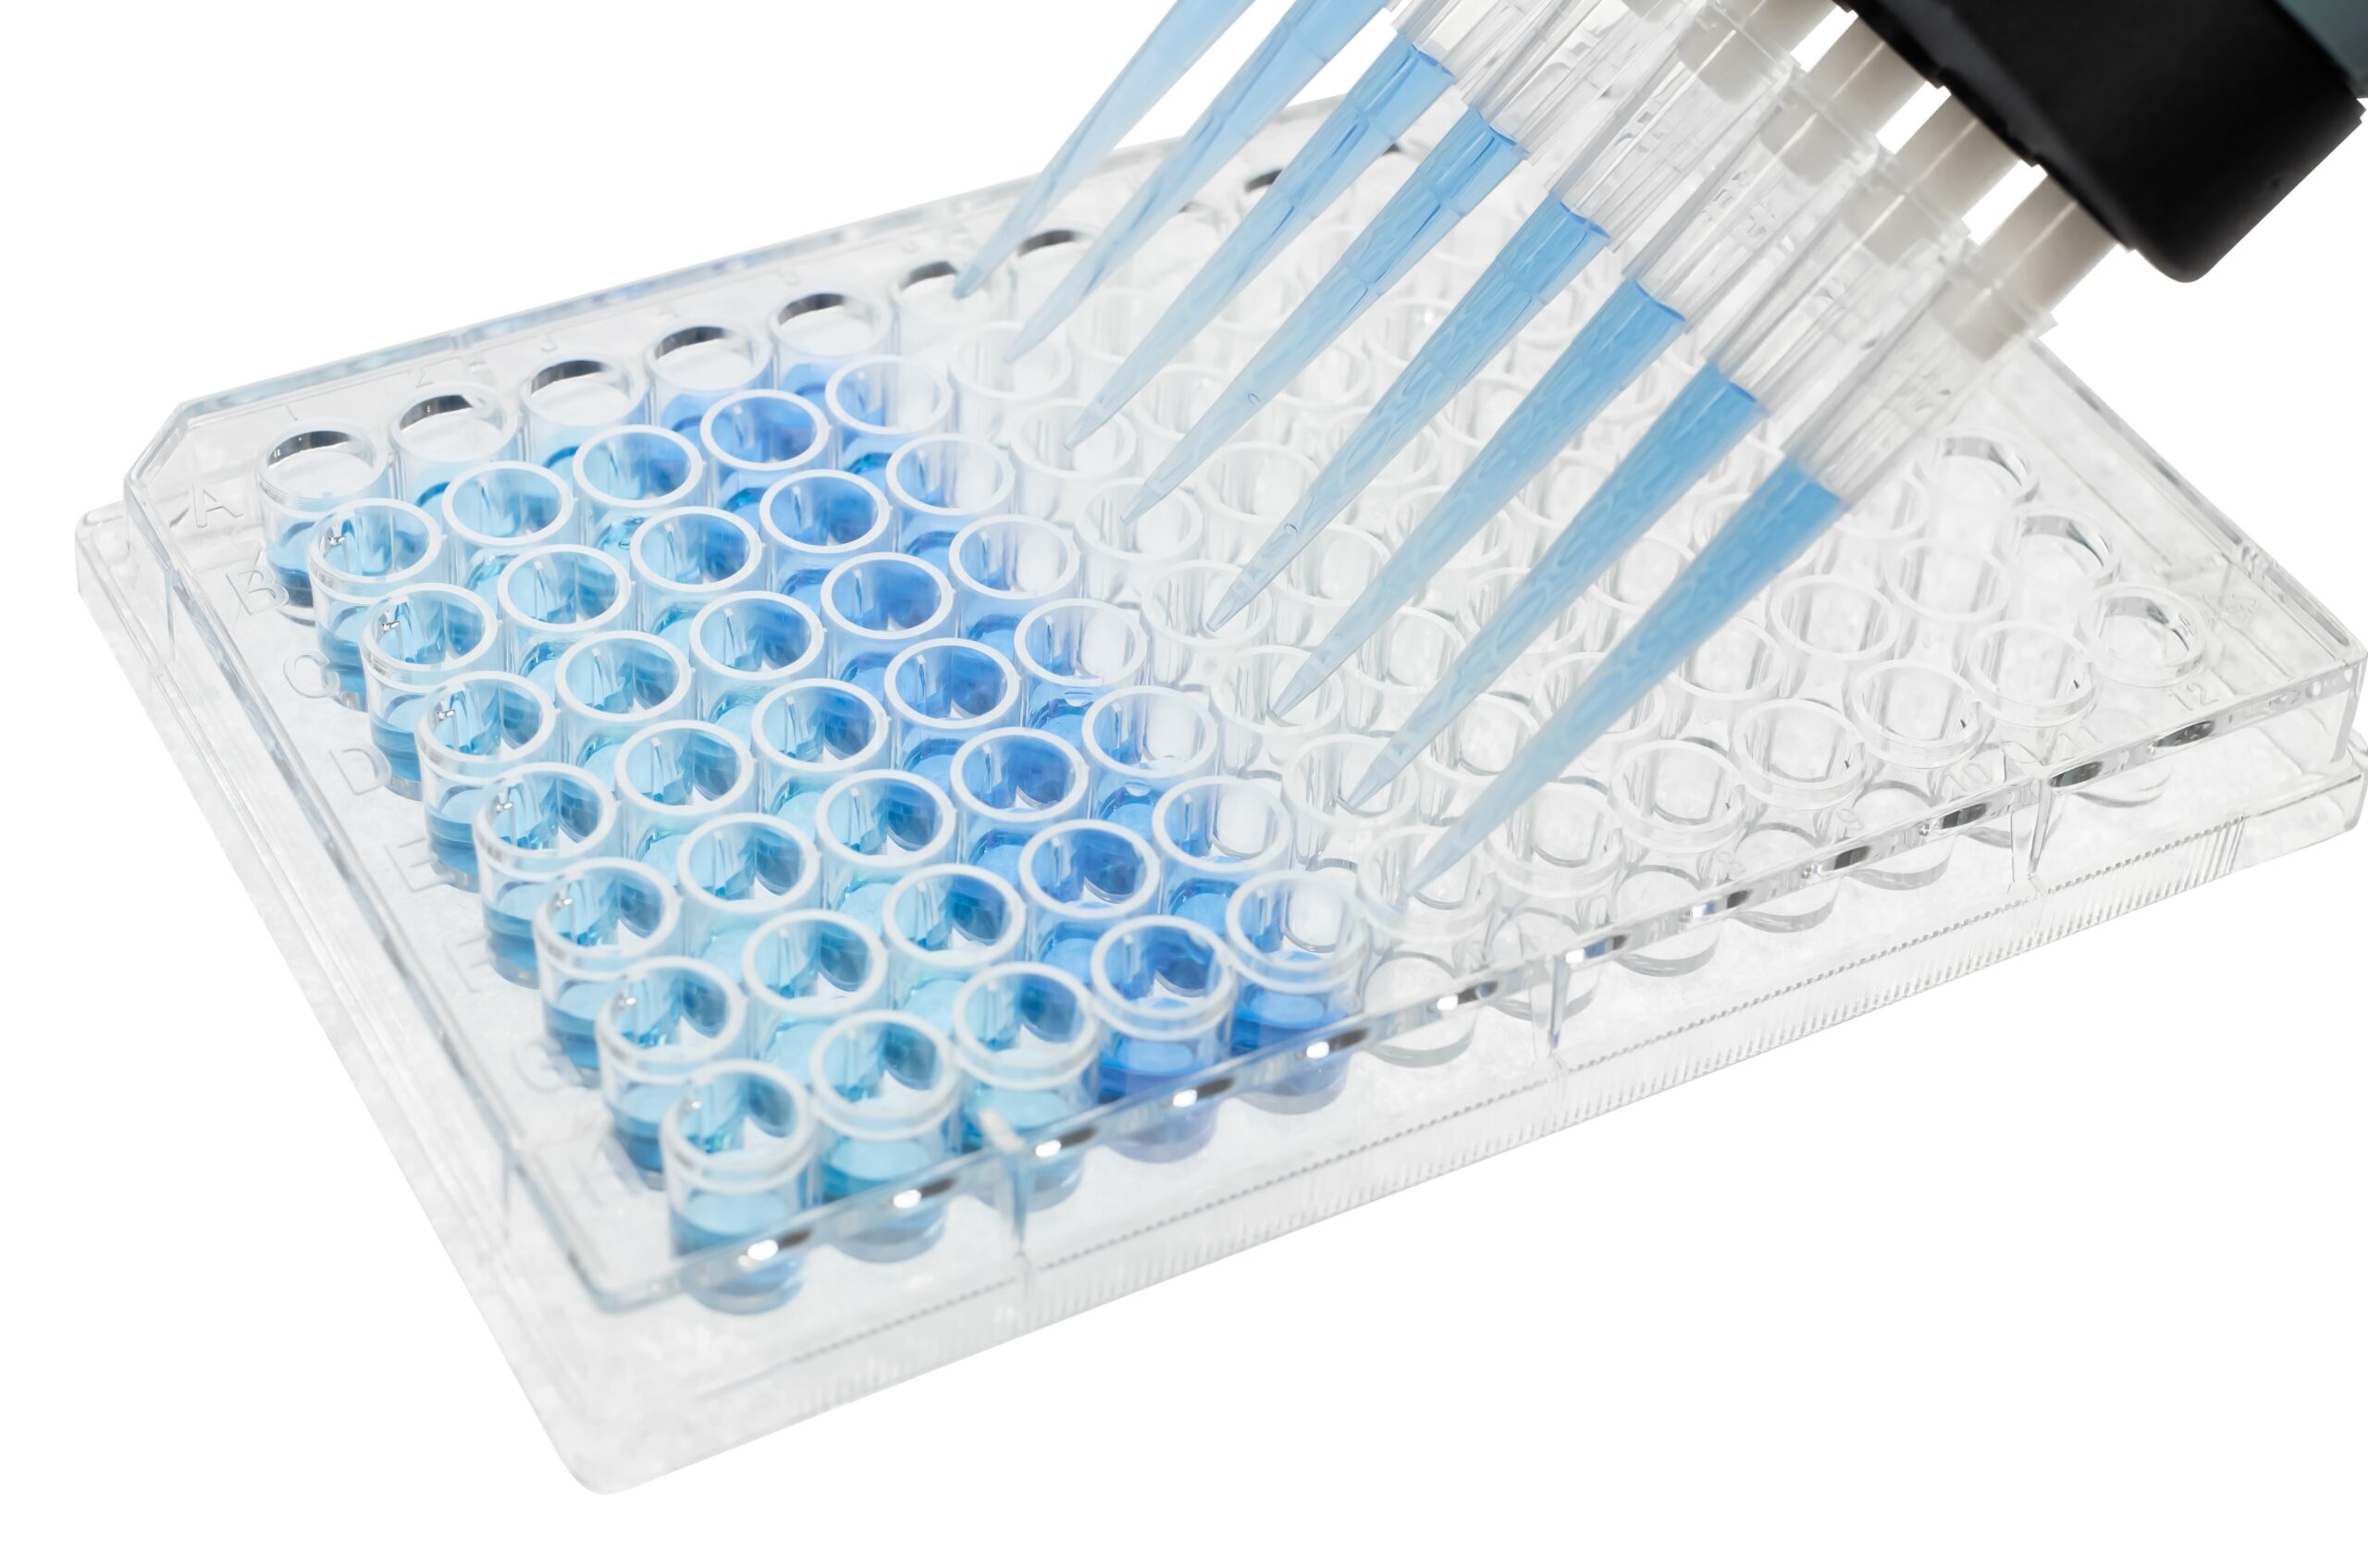 96 well plate with 8 channel pipette dispensing blue liquid